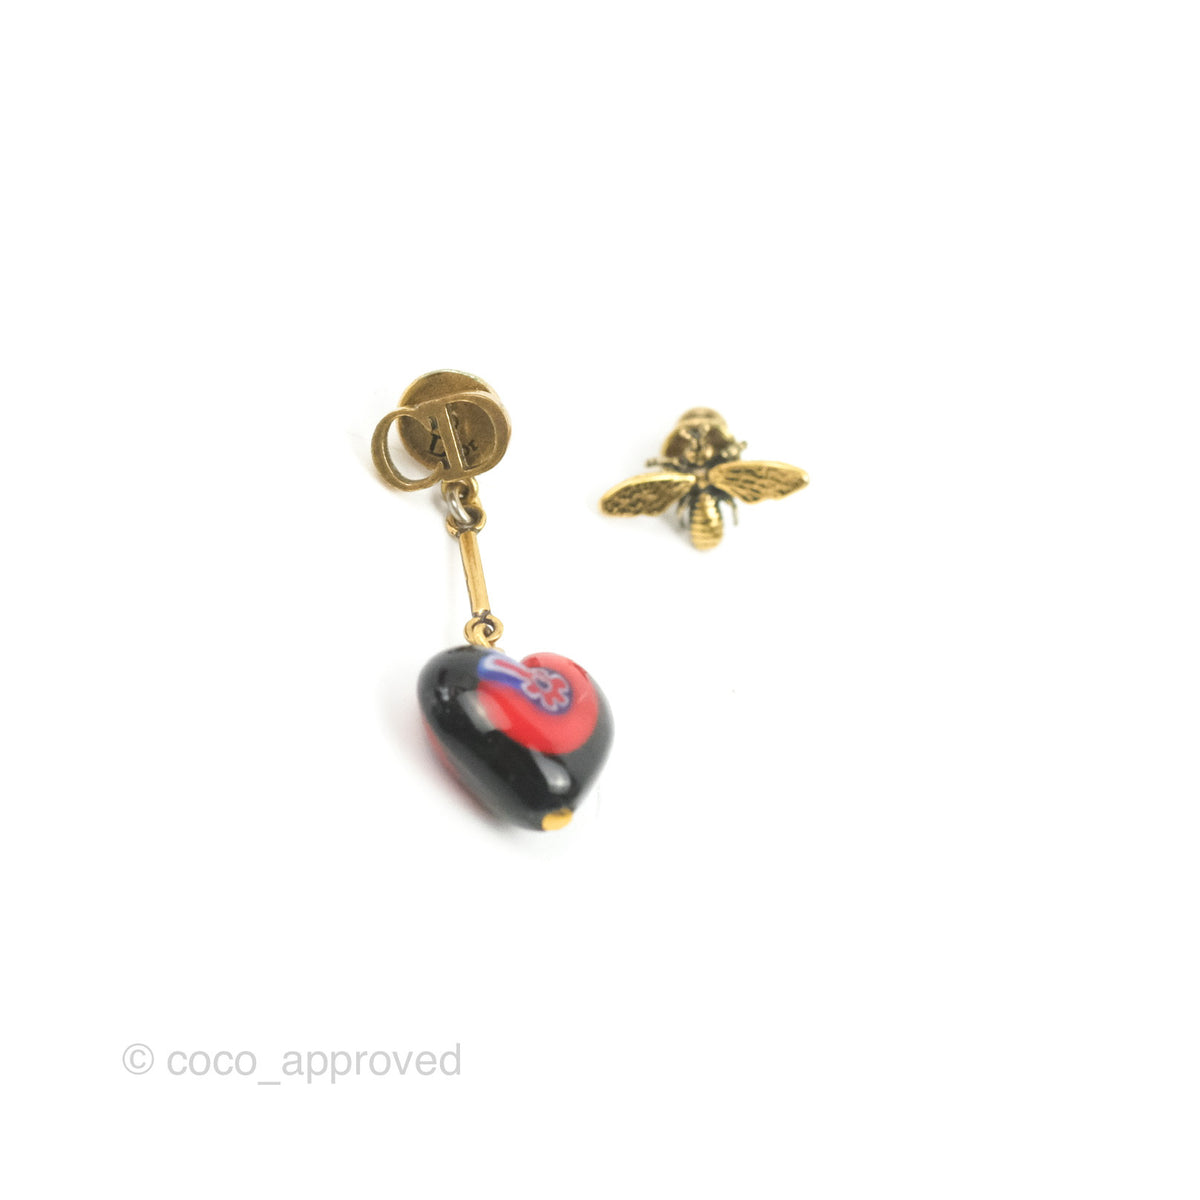 Dior Dio(r)evolution Heart Earrings Aged Gold – Coco Approved Studio